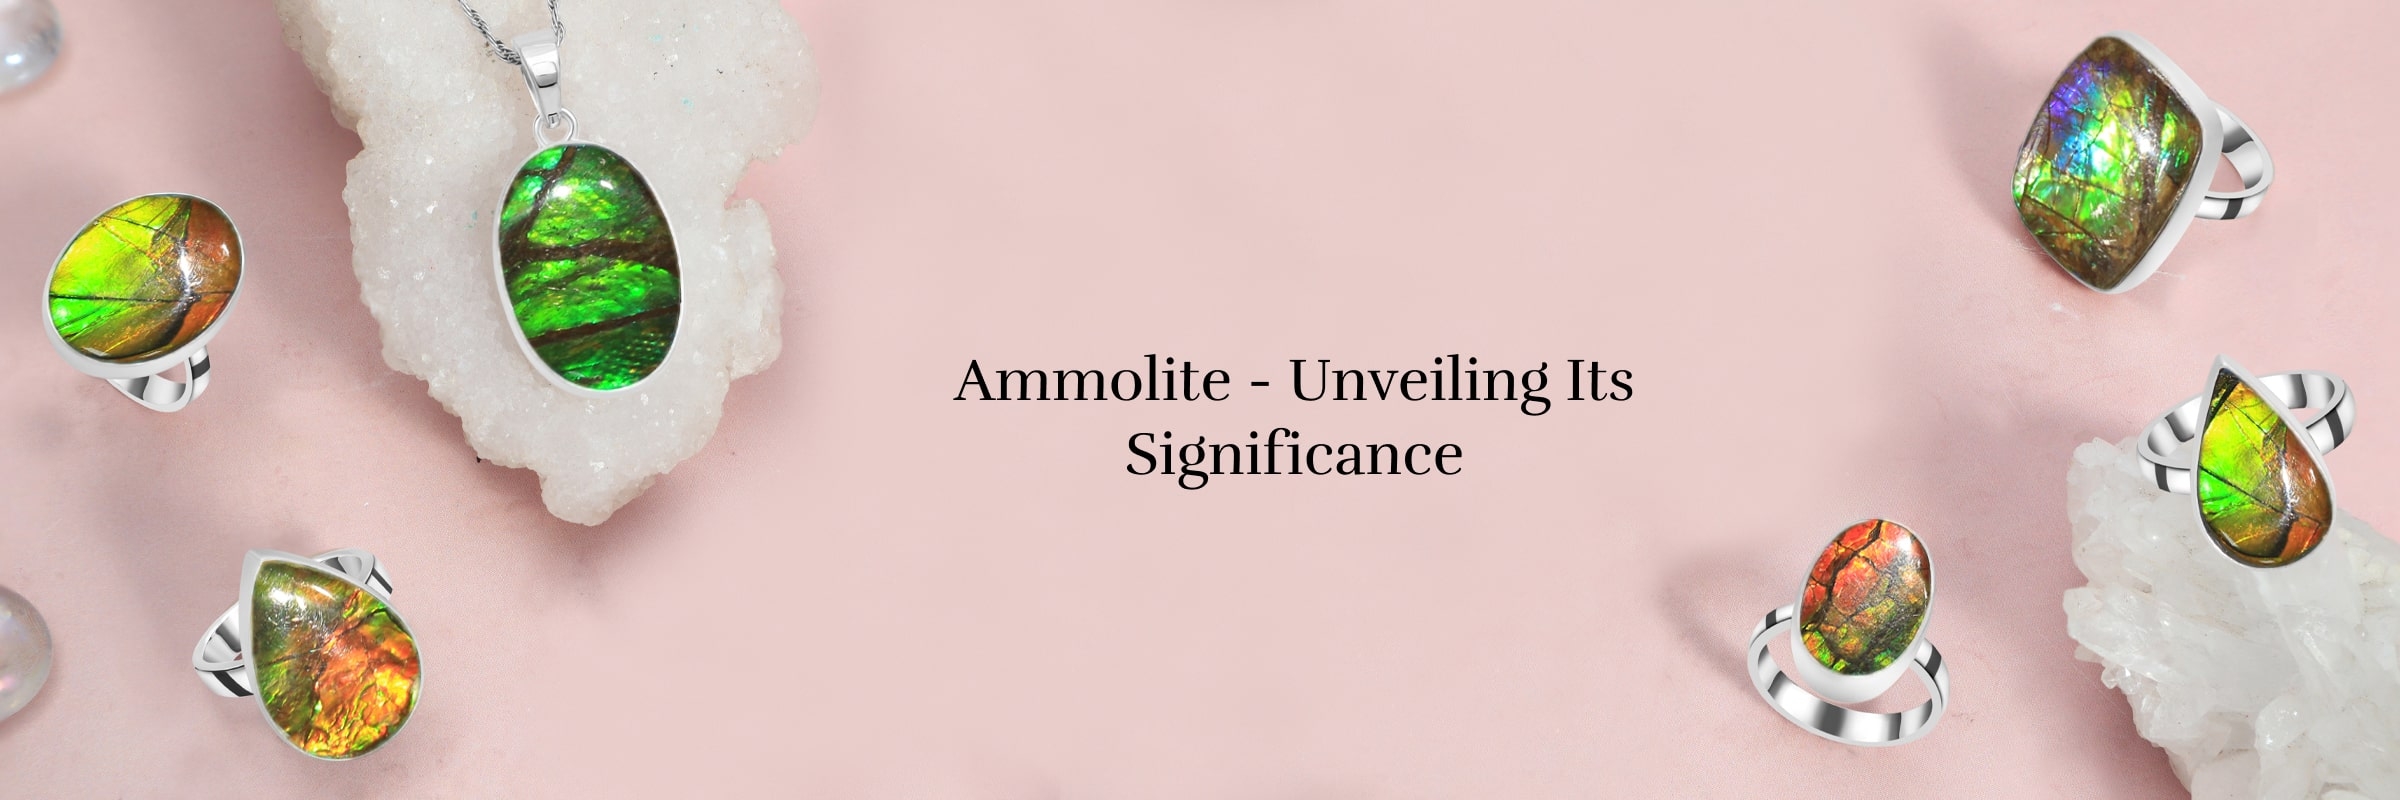 Meaning of Ammolite